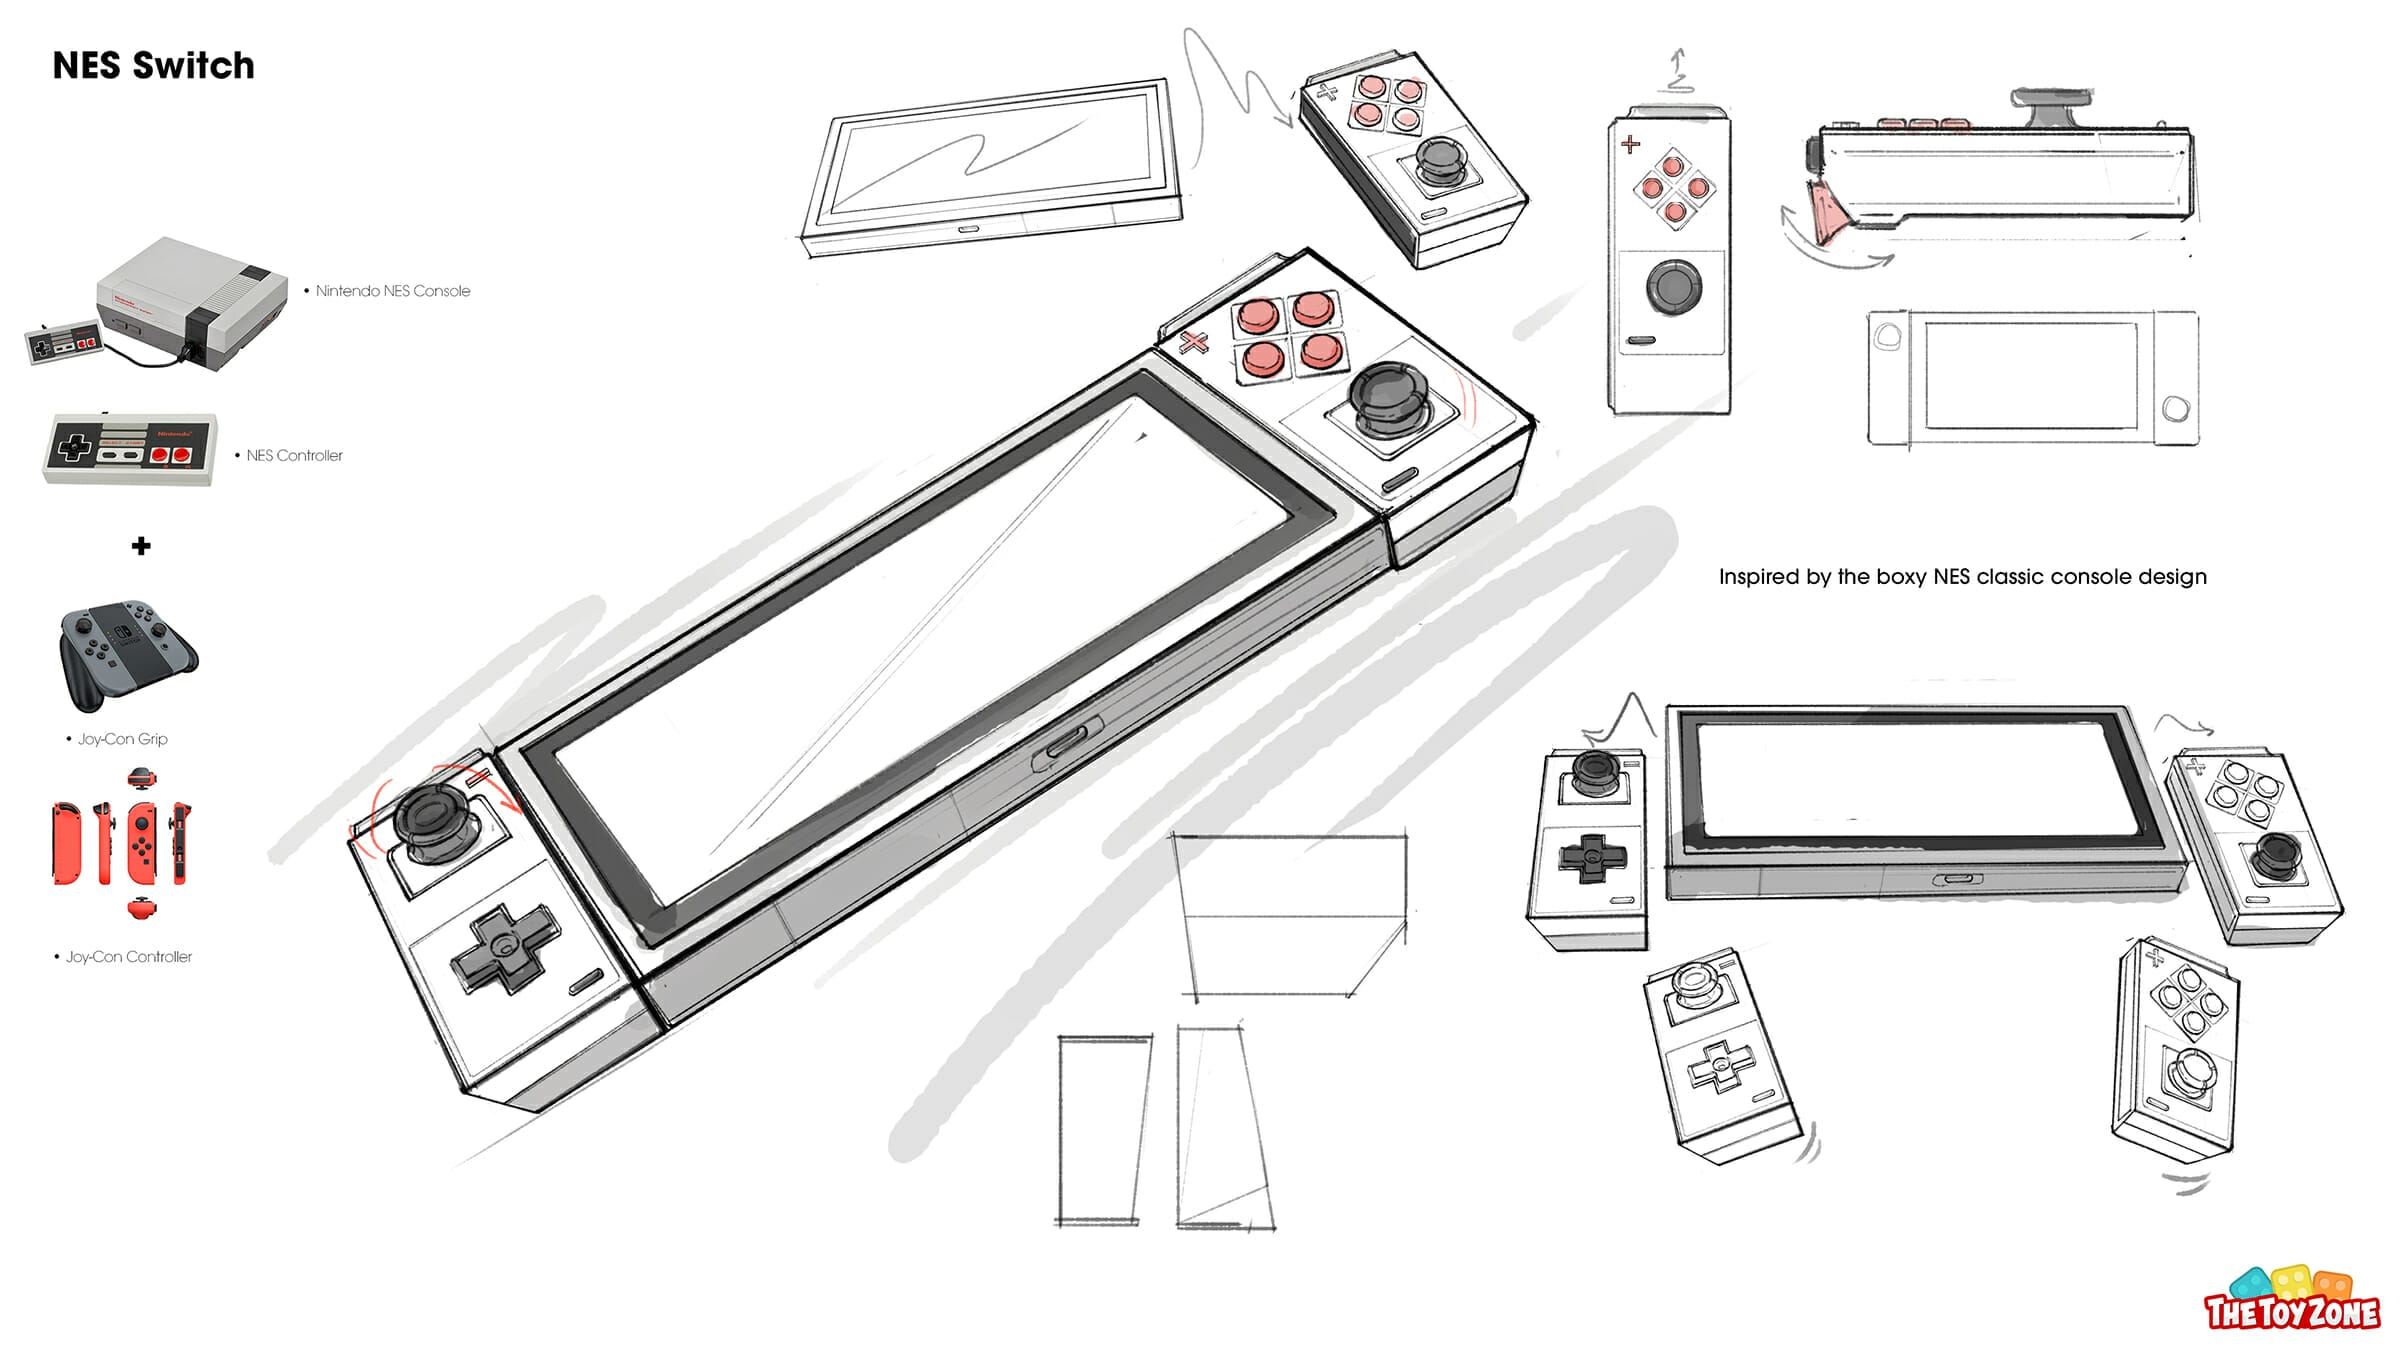 The NES Switch concept art sketch